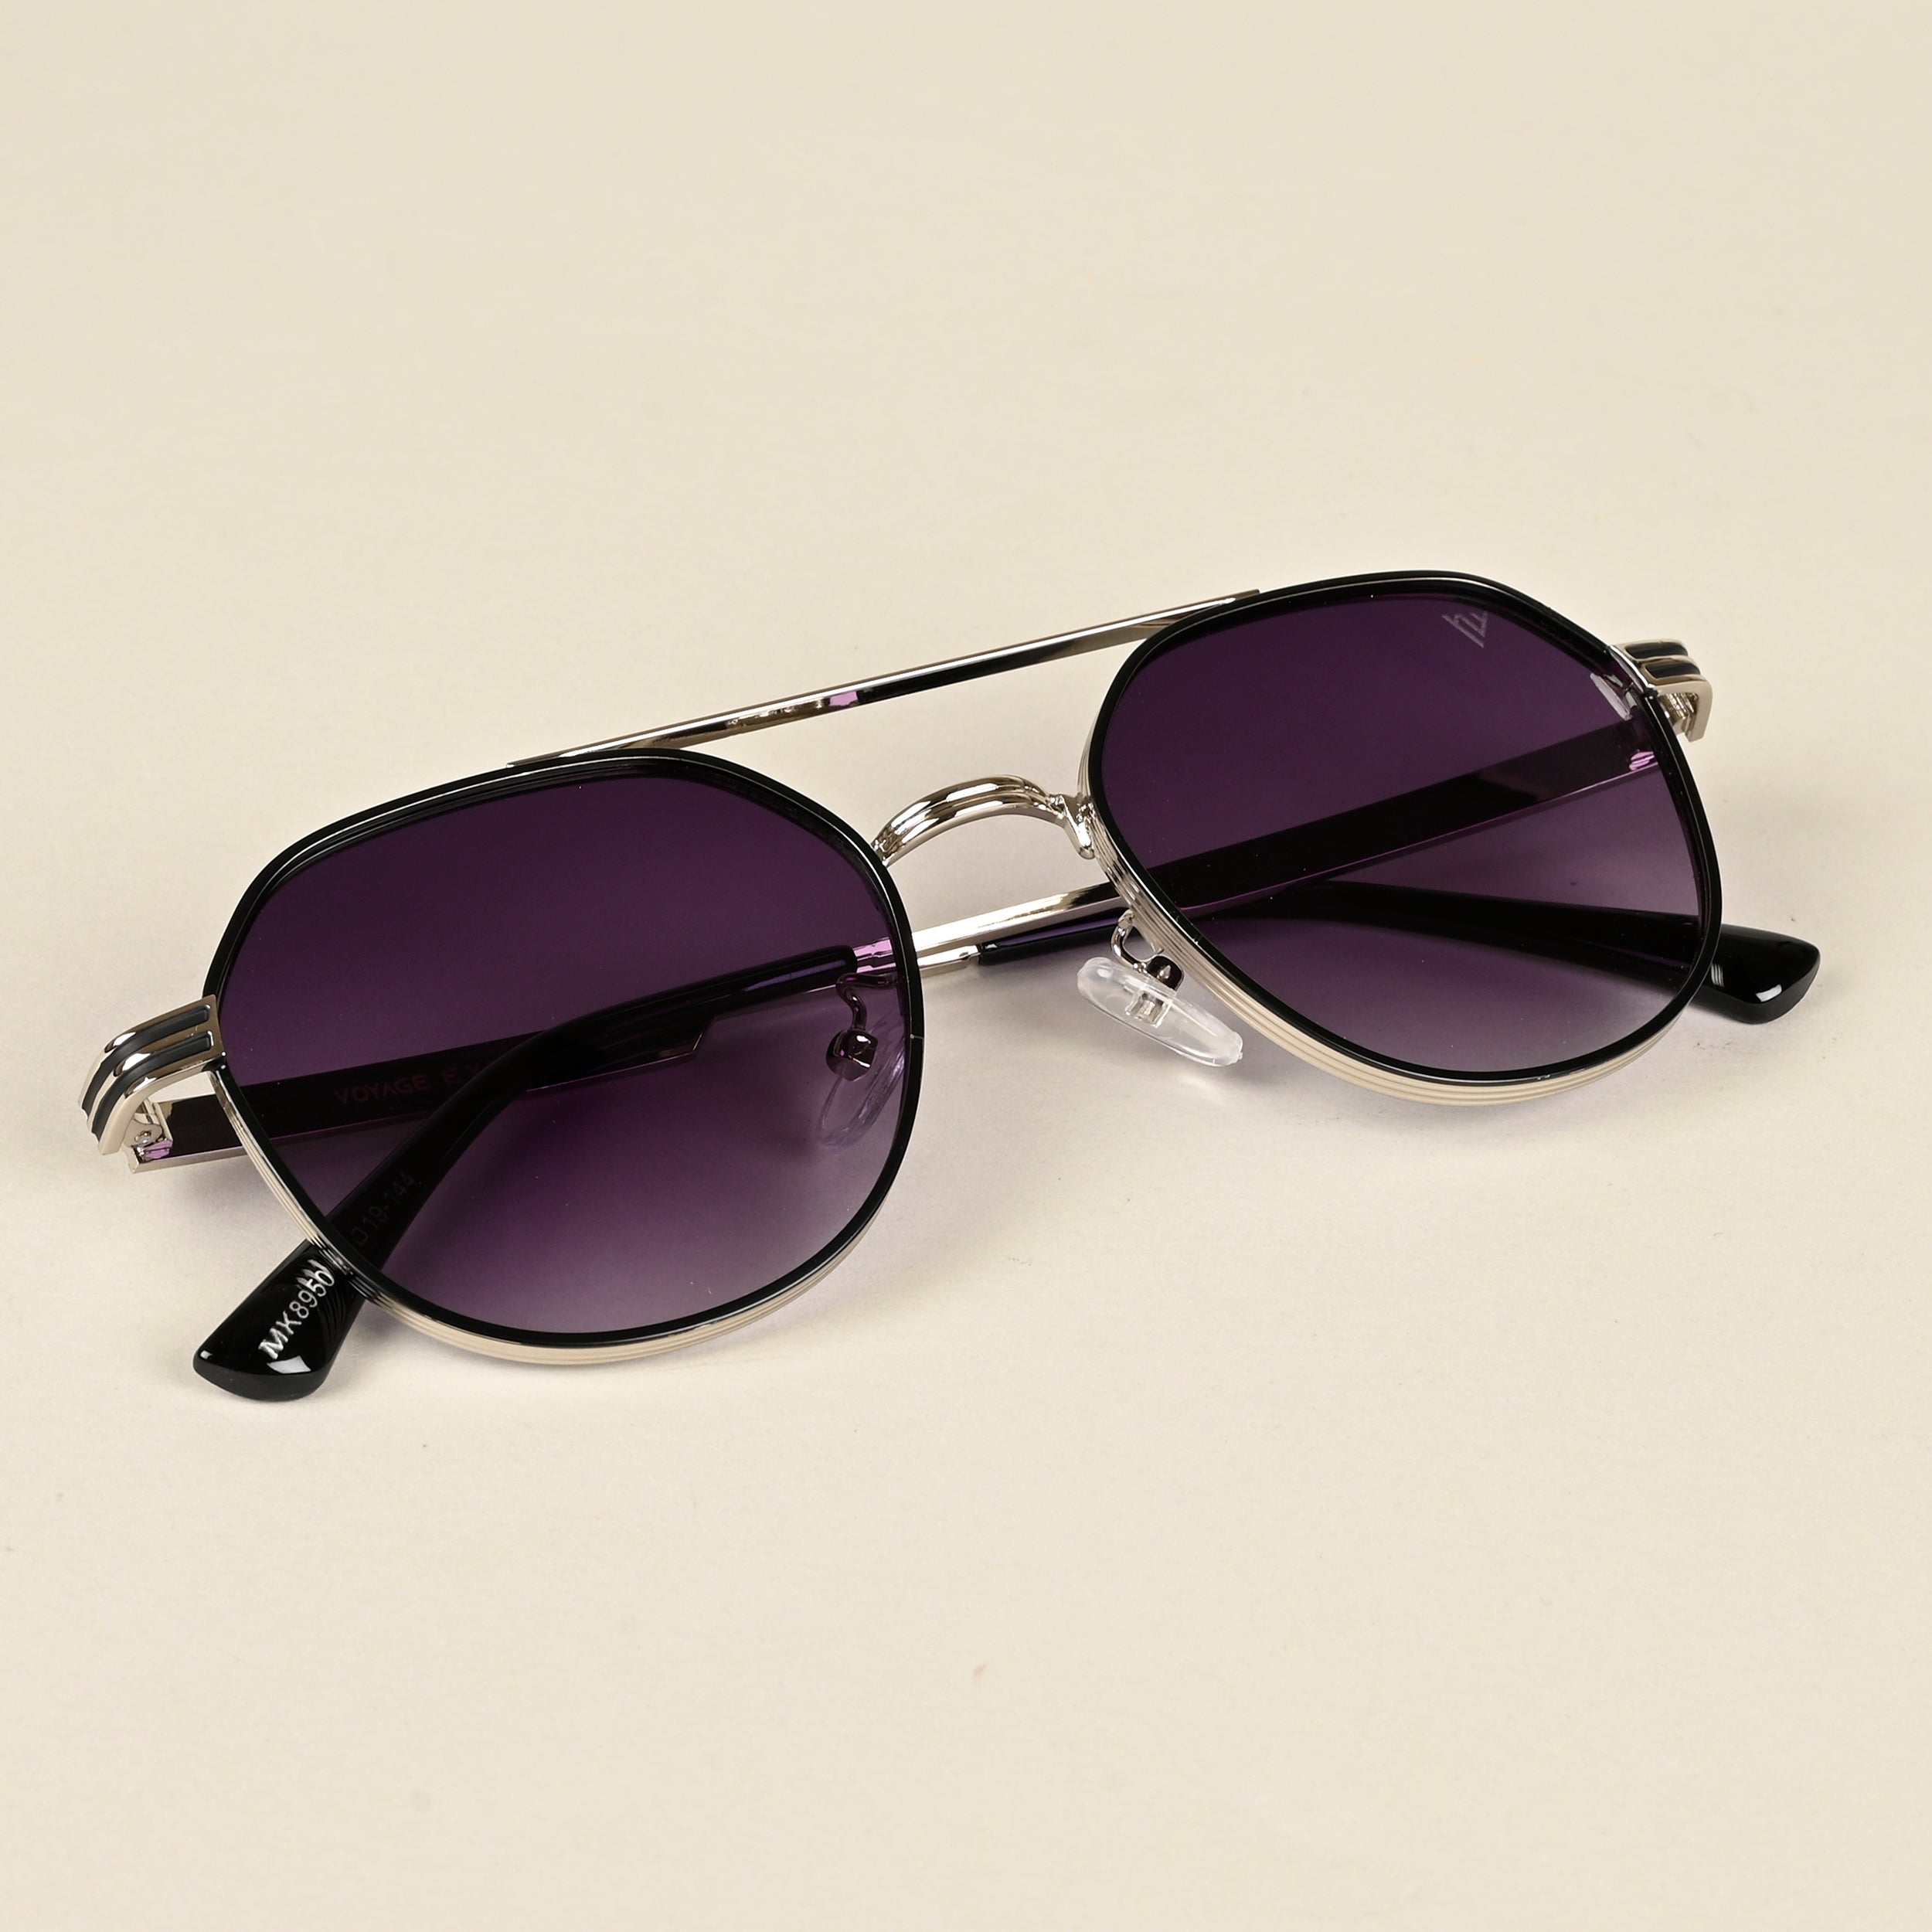 Voyage Purple & Clear Round Sunglasses for Men & Women (8950MG4333)